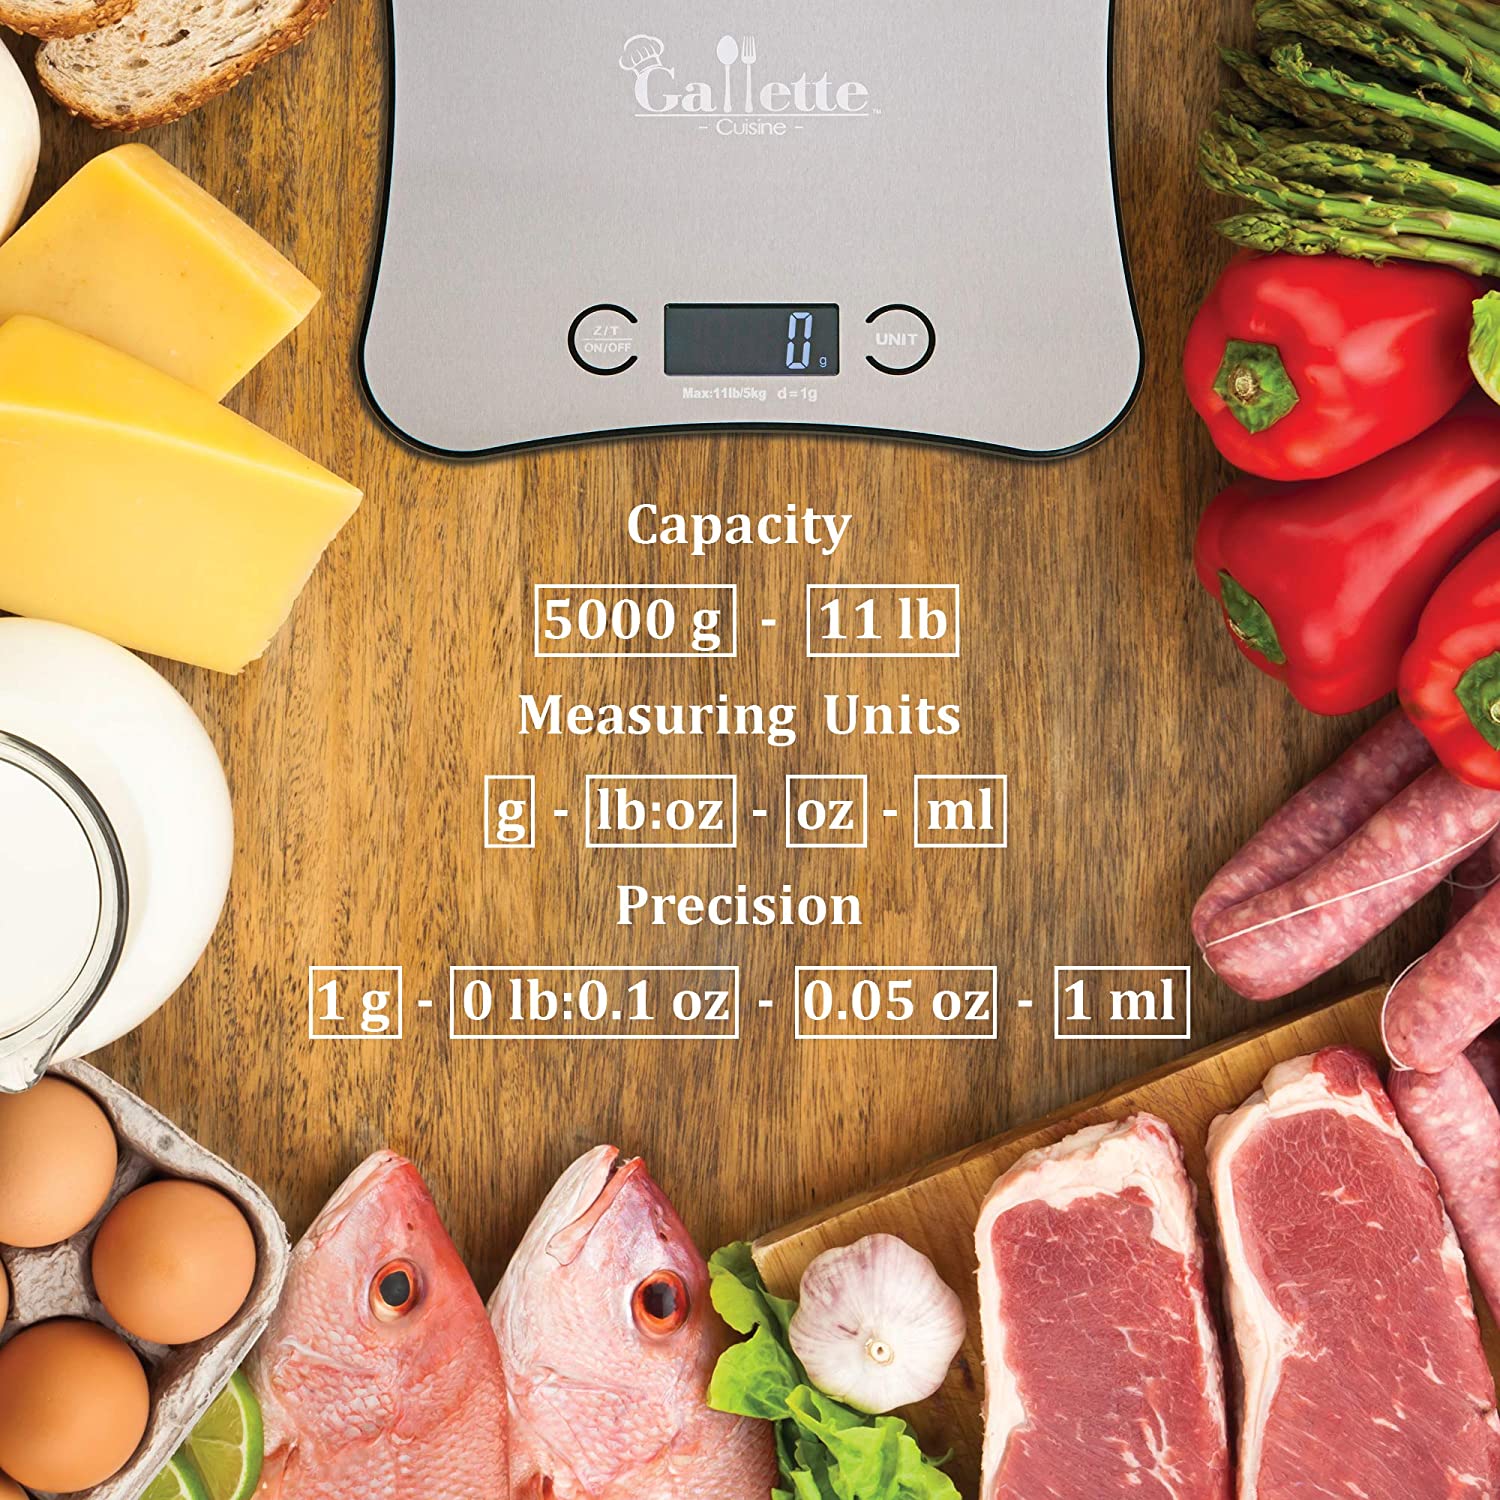 Digital Kitchen Scale For Weighing Food, With Unit Conversions In Grams,  Ounces, Pounds, Up To 11 Pounds (1g-5kg+)